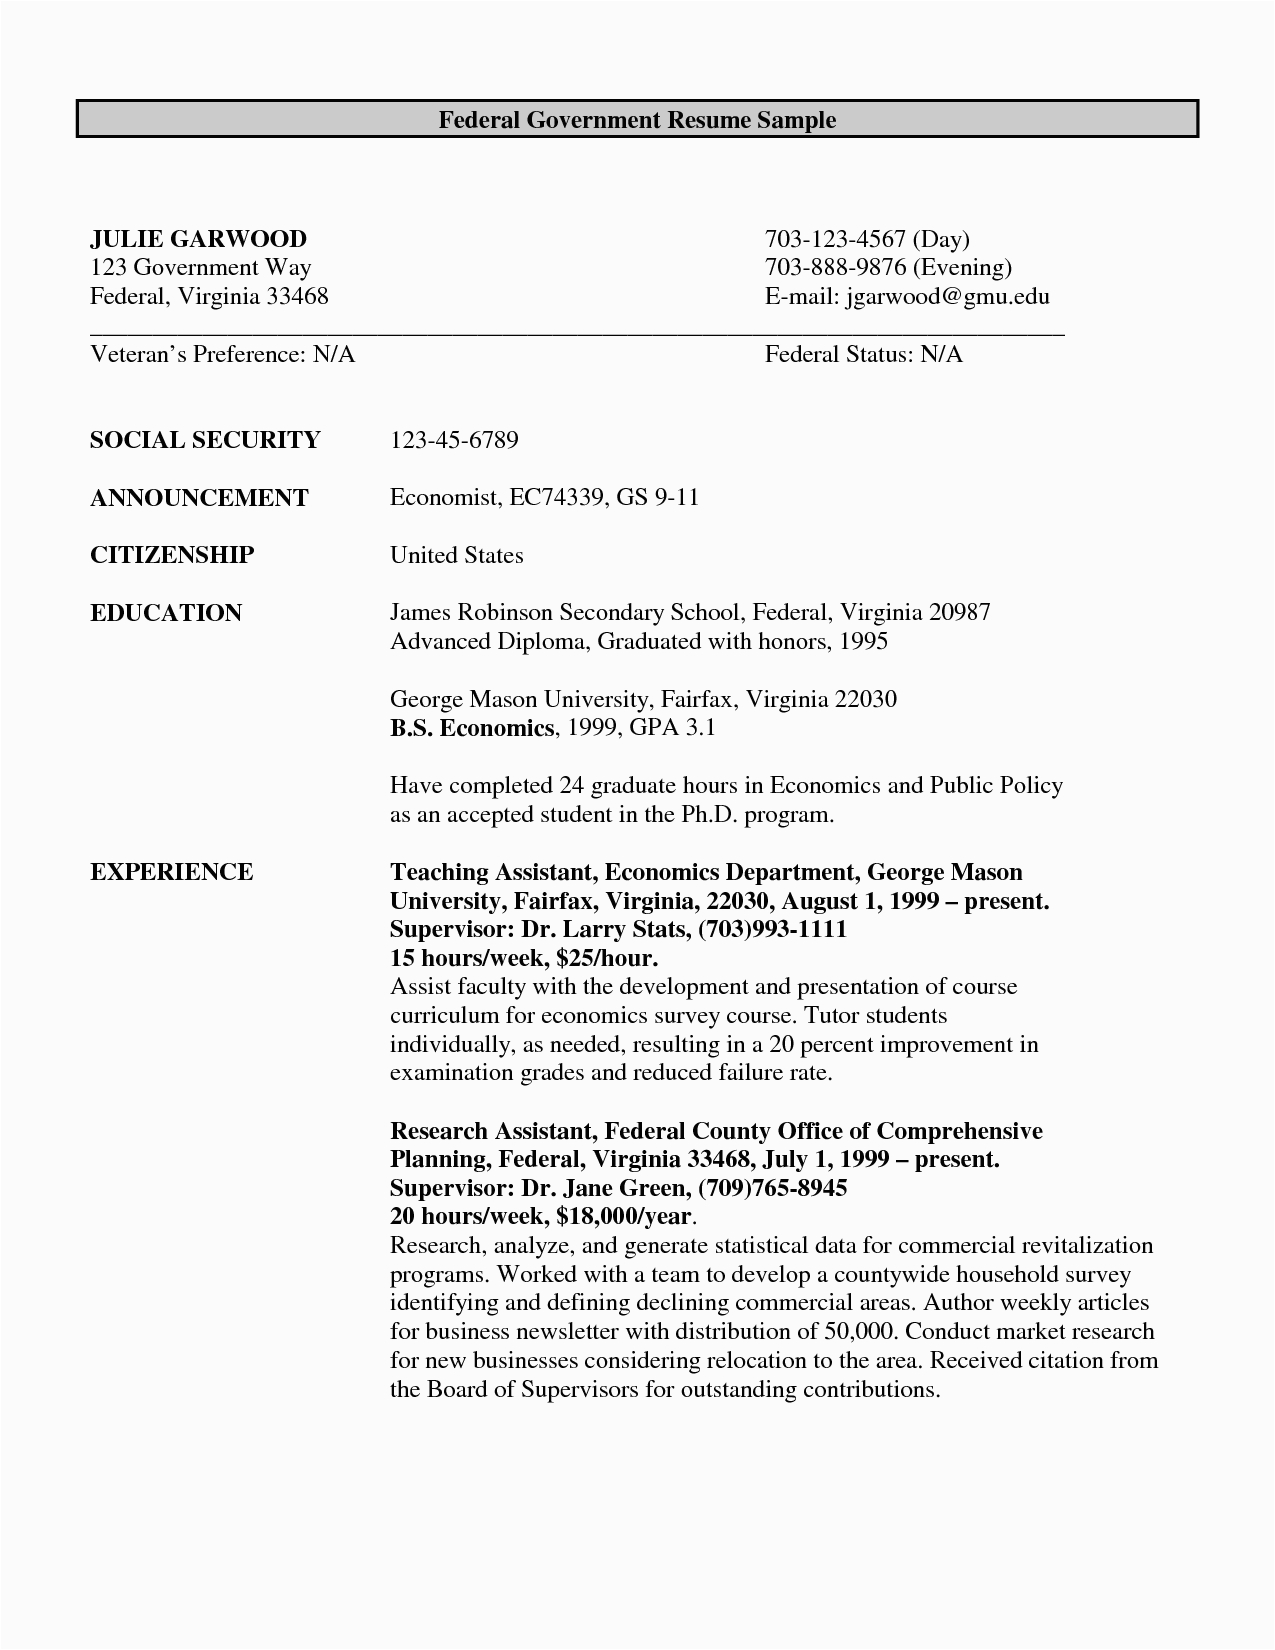 Sample Resume for A Government Position Federal Government Resume Examplecareer Resume Template